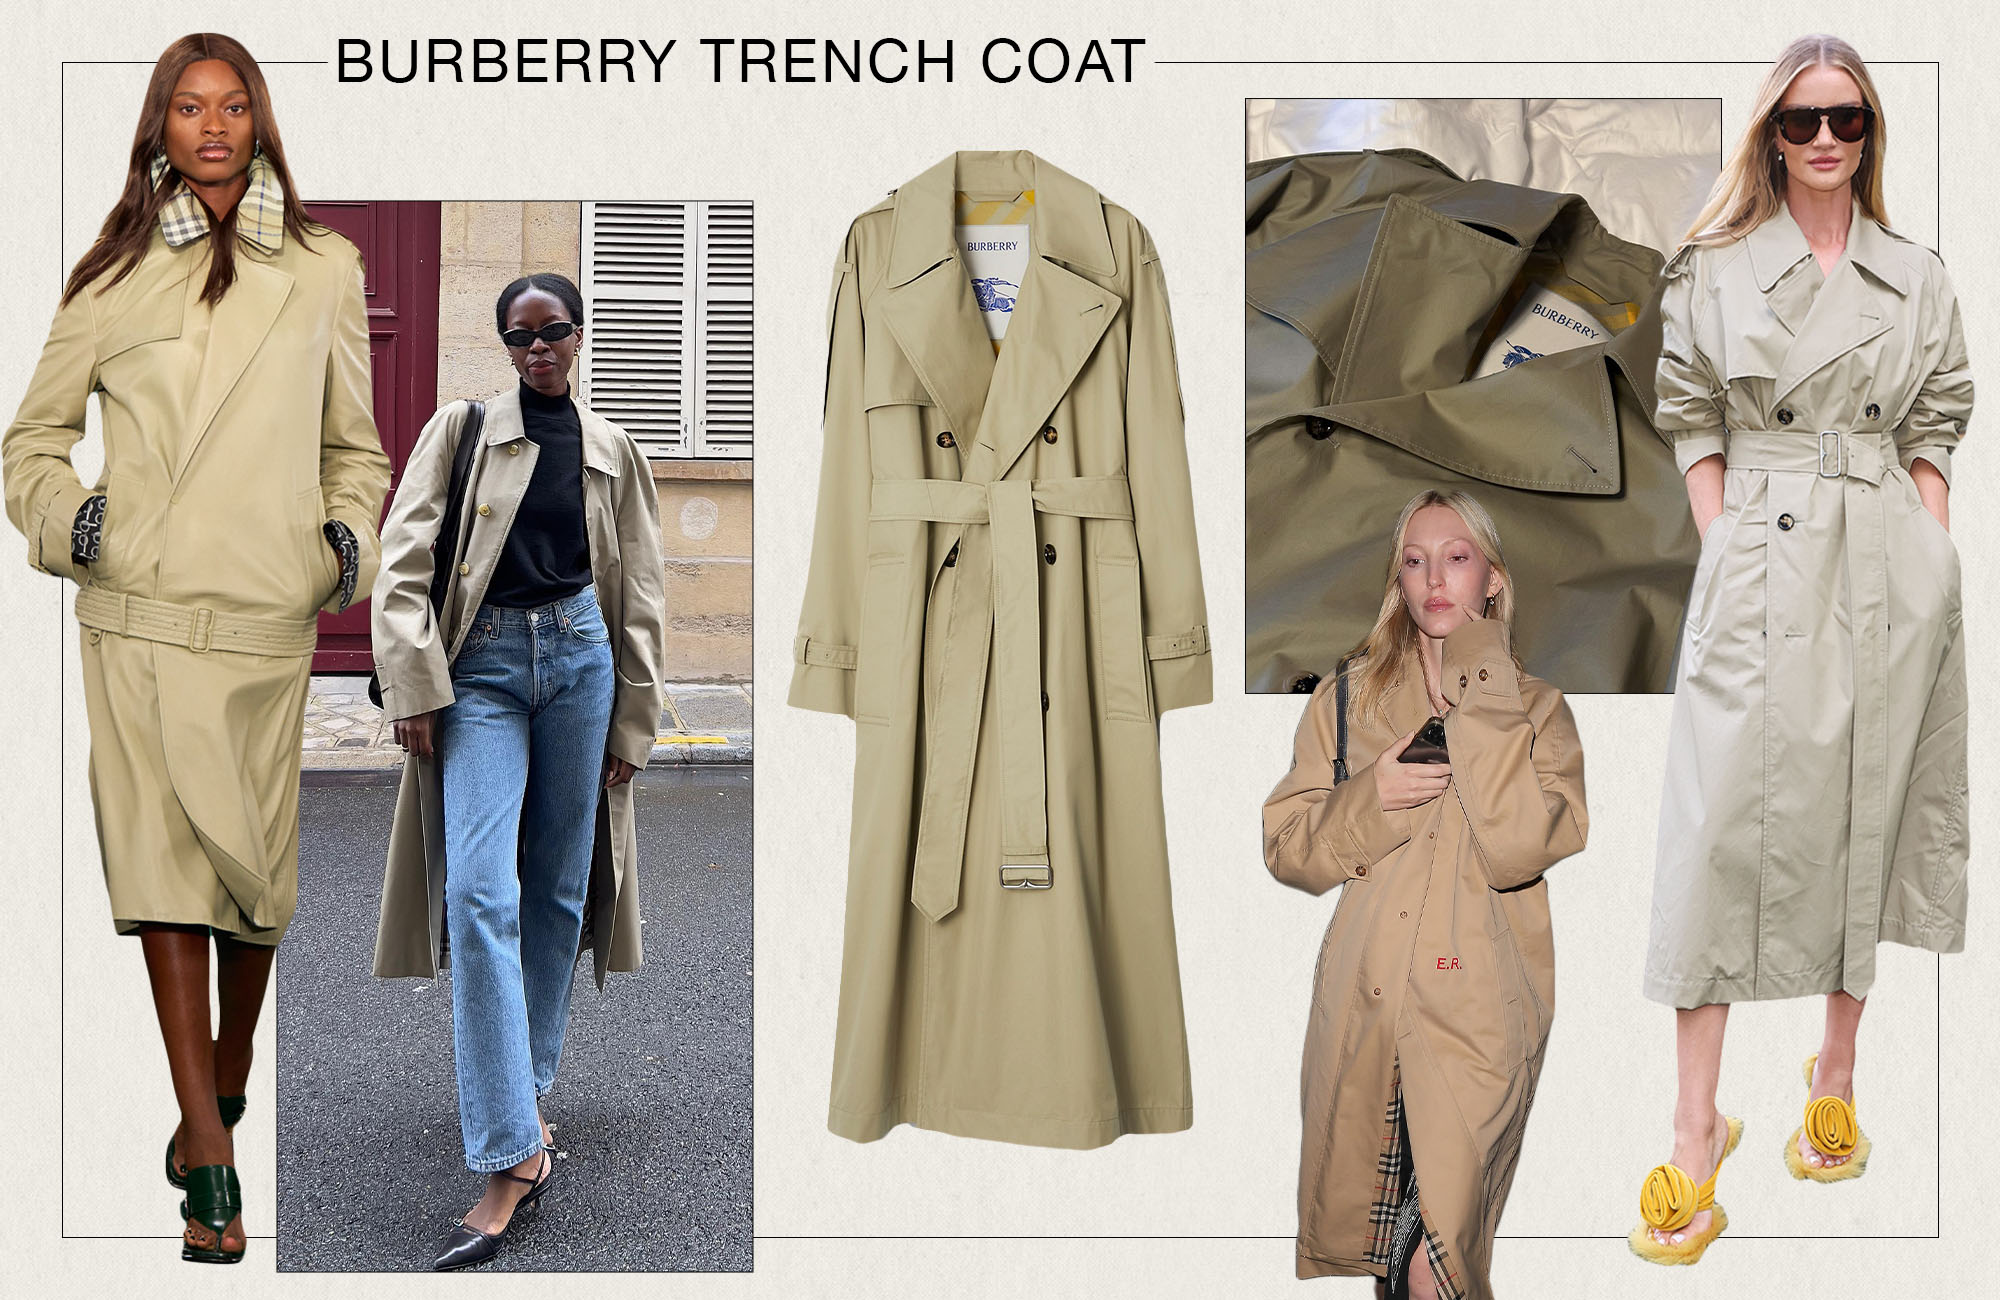 A collage of runway, IG, and street-style images showcasing Burberry trench coats